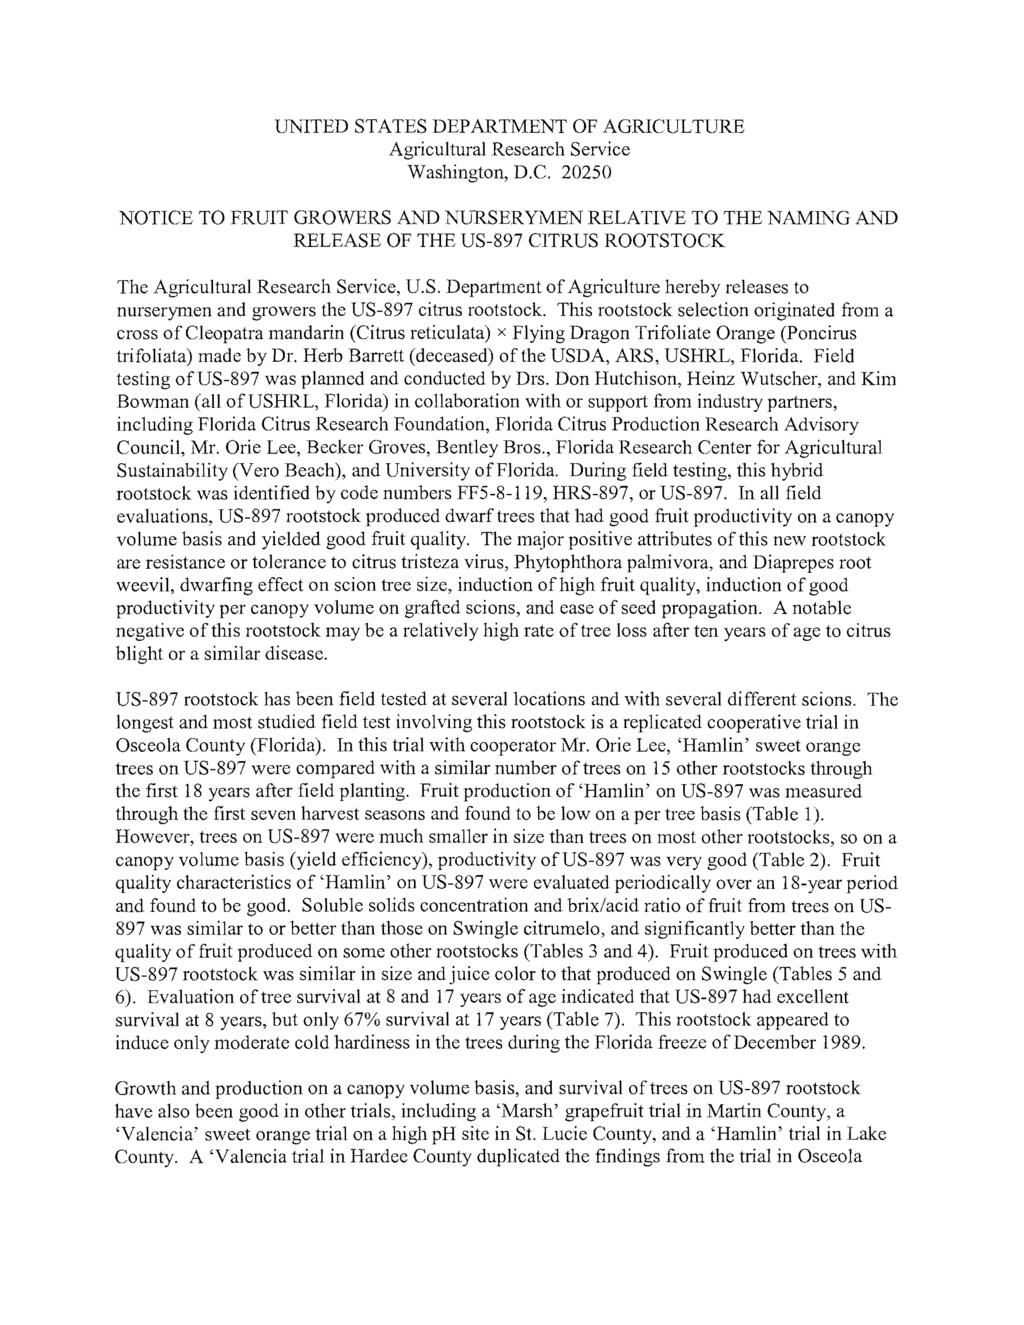 UNITED STATES DEPARTMENT OF AGRICULTURE Agricultural Research Service Washington, D.C. 20250 NOTICE TO FRUIT GROWERS AND 1\u~SERYMENRELATIVE TO THE NAMING ANTI RELEASE OF THE US-897 CITRUS ROOTSTOCK The Agricultural Research Service, U.